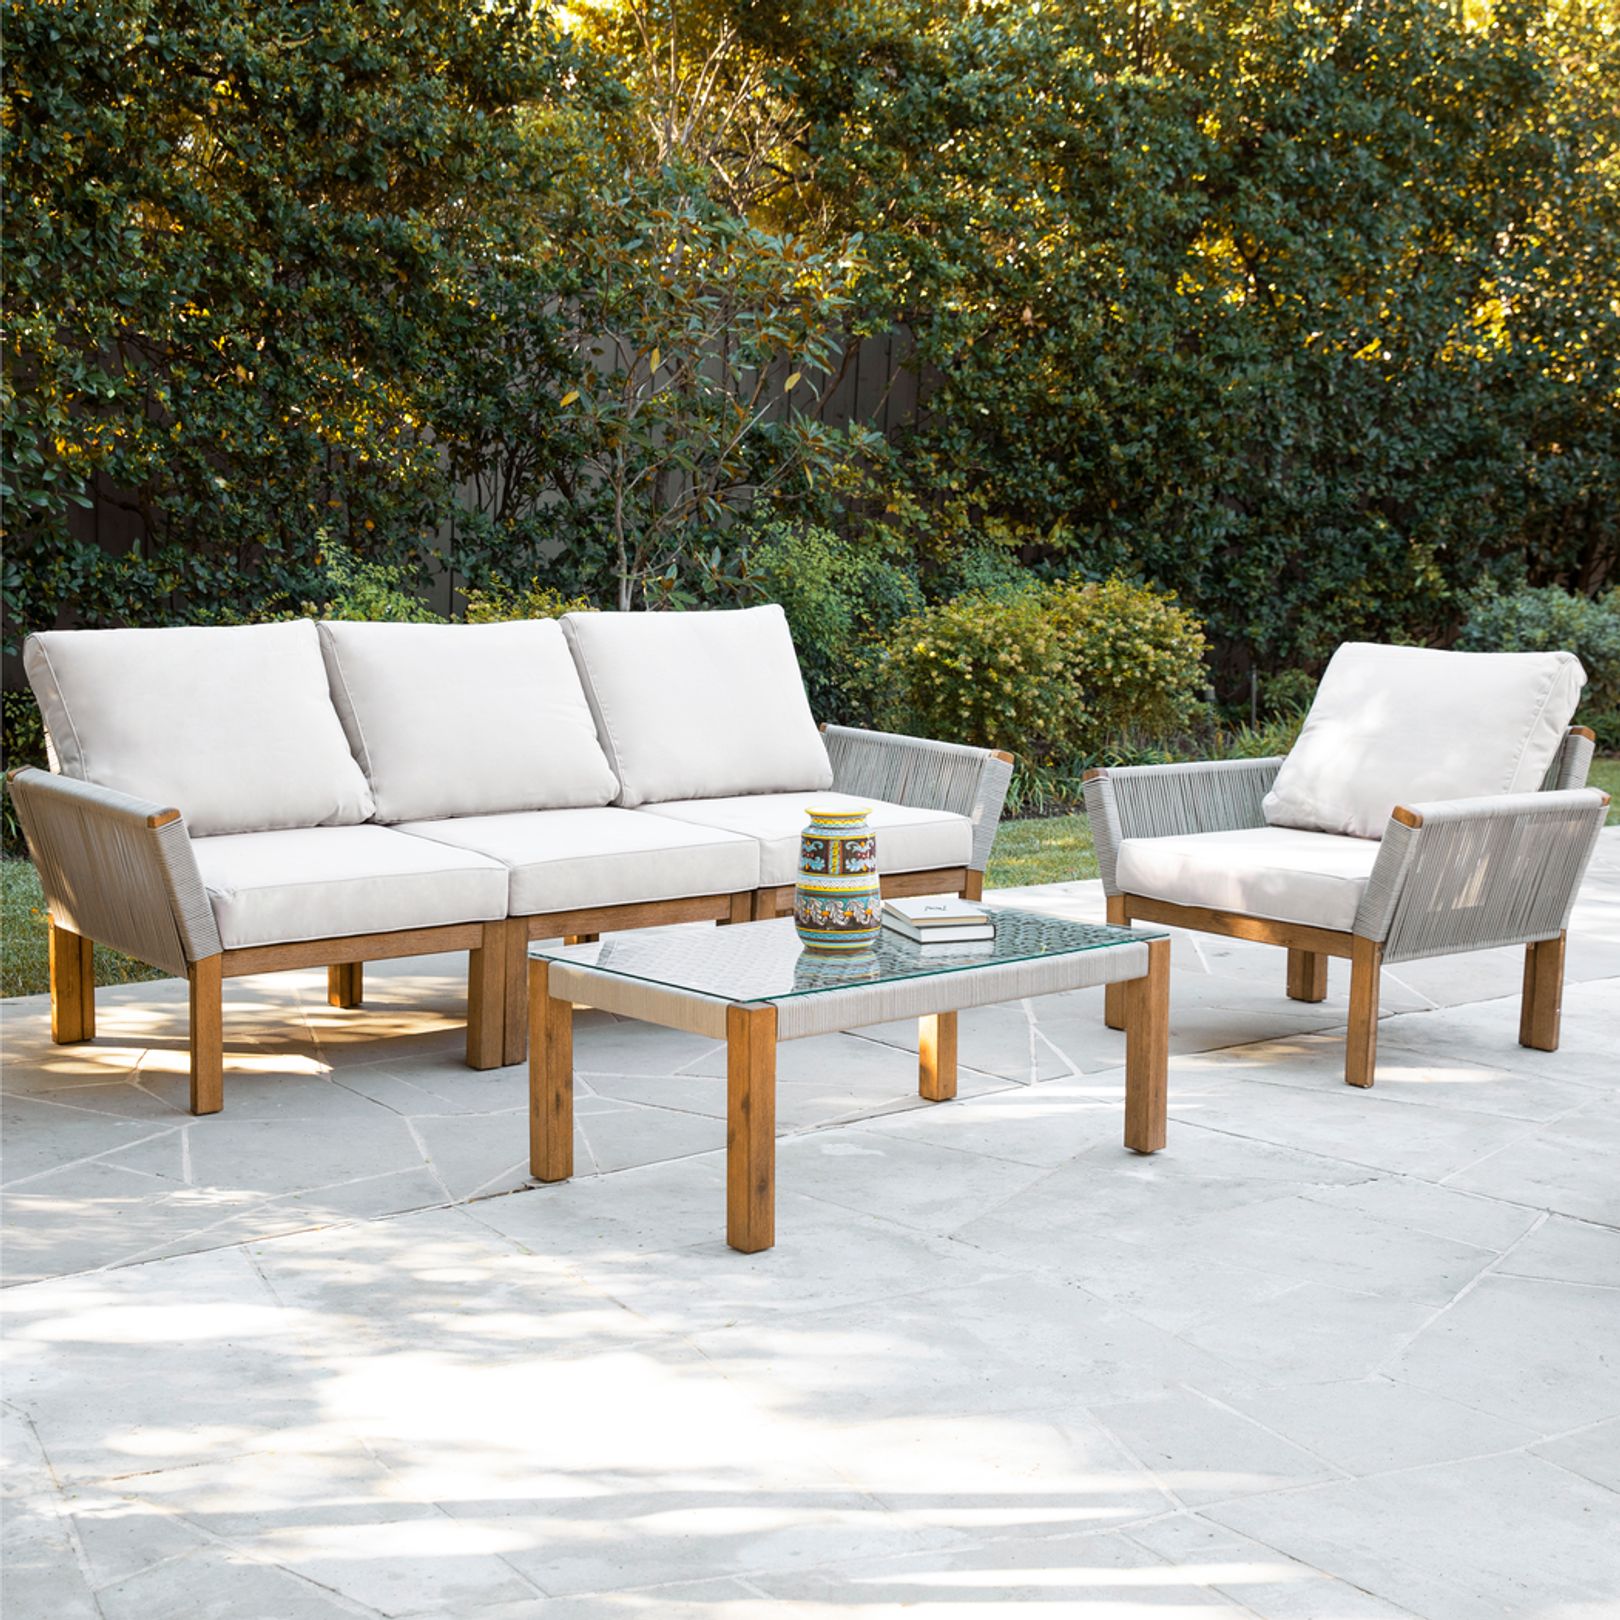 Photo of gray and wood outdoor seating set